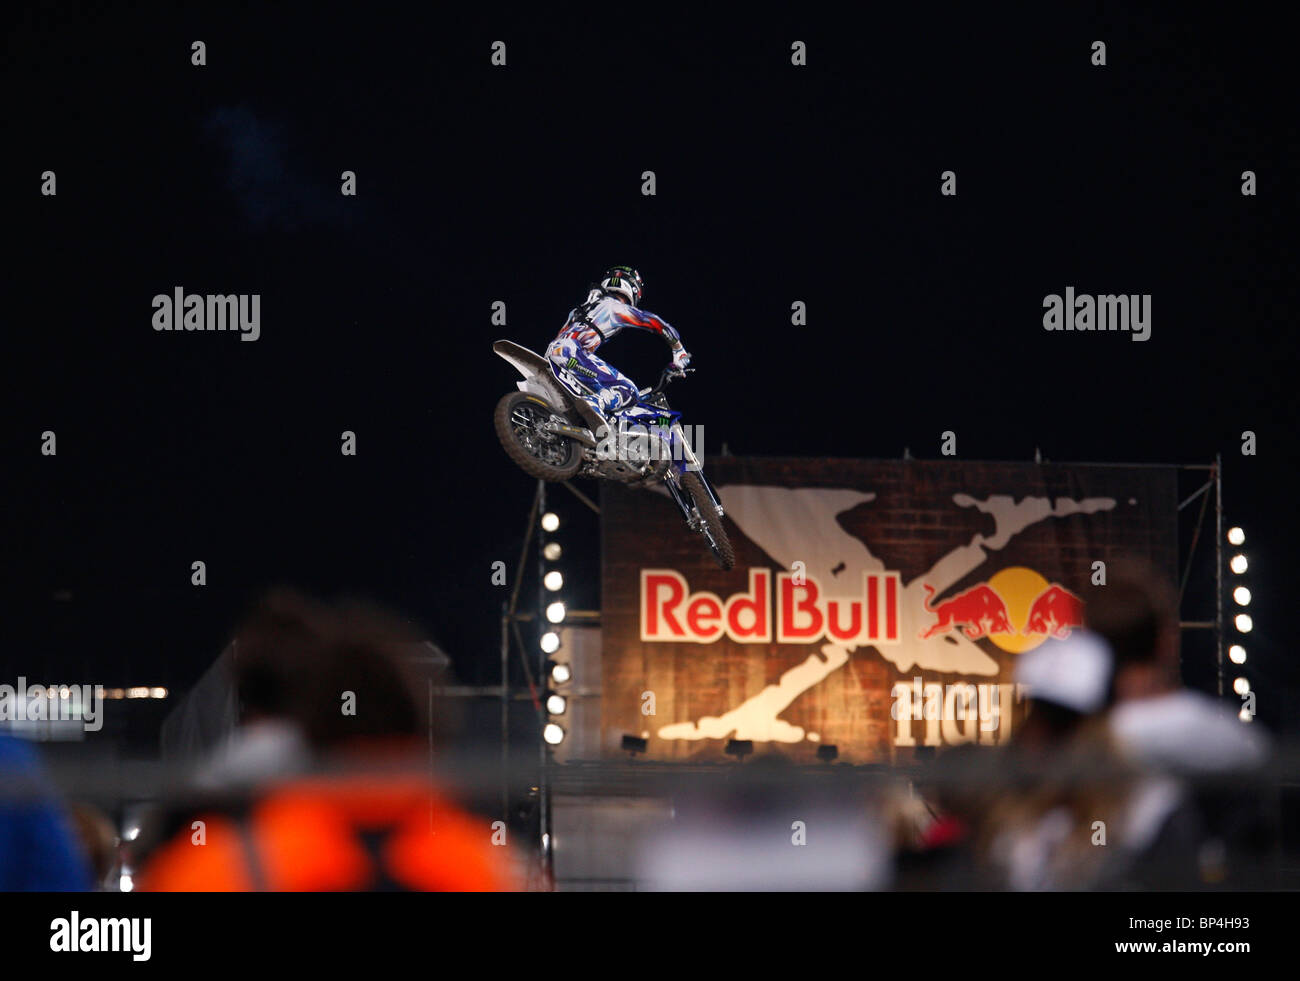 Red bull helmet hi-res stock photography and images - Page 2 - Alamy